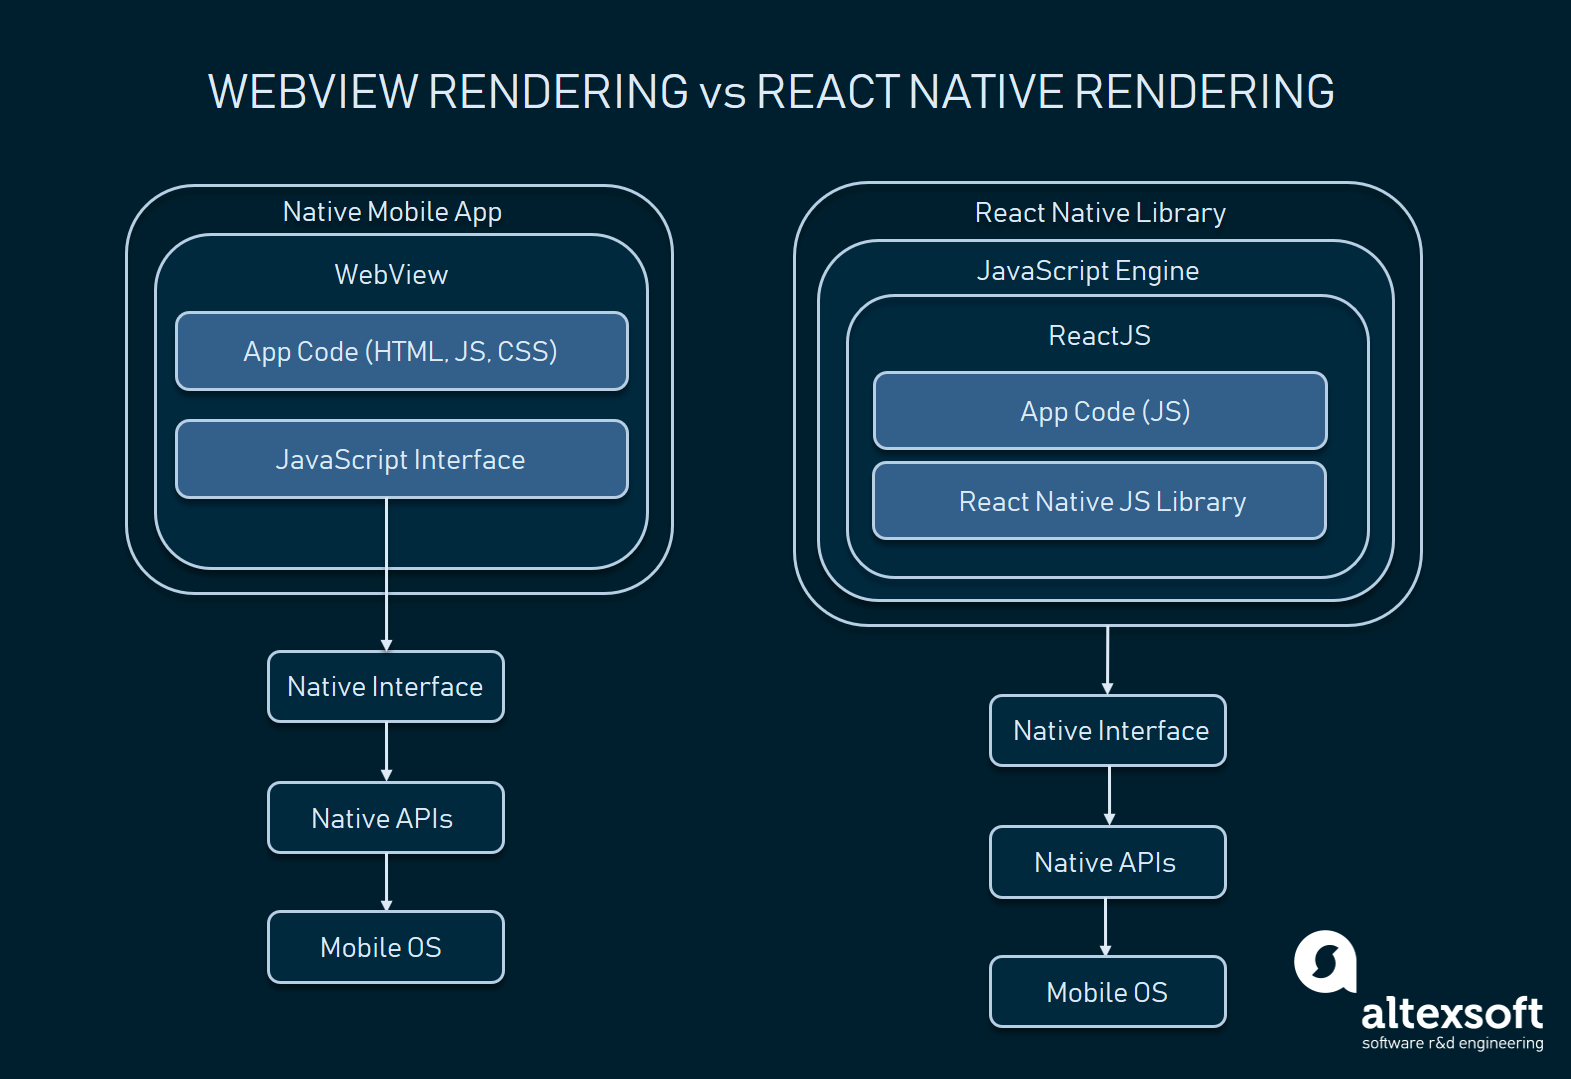 Reactjs And React Native Overview Pros And Cons Altexsoft